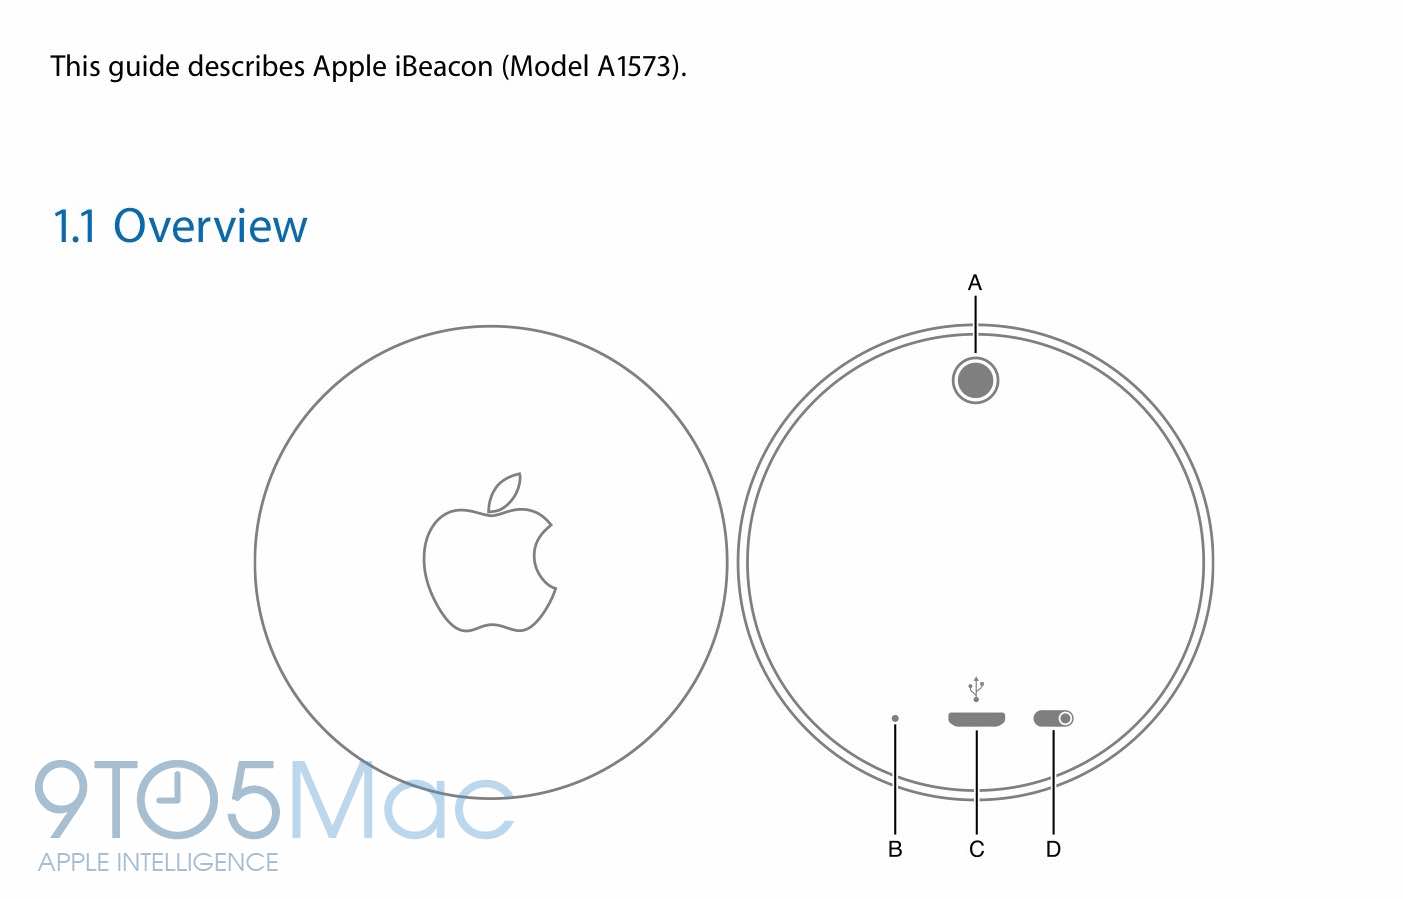 Apple's unreleased iBeacon hardware exposed in user manual published by